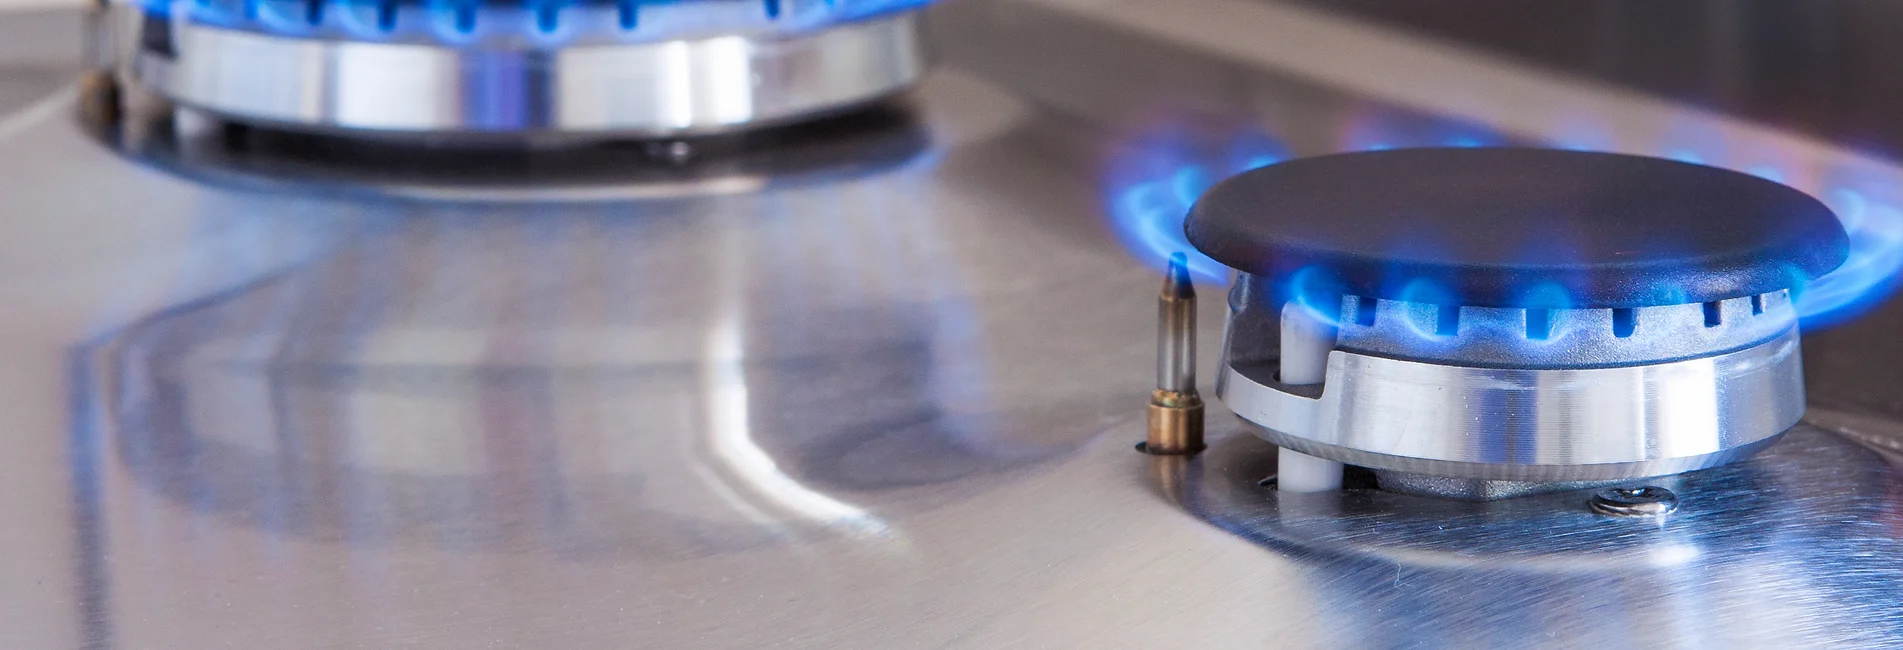 a gas burner with a blue flame